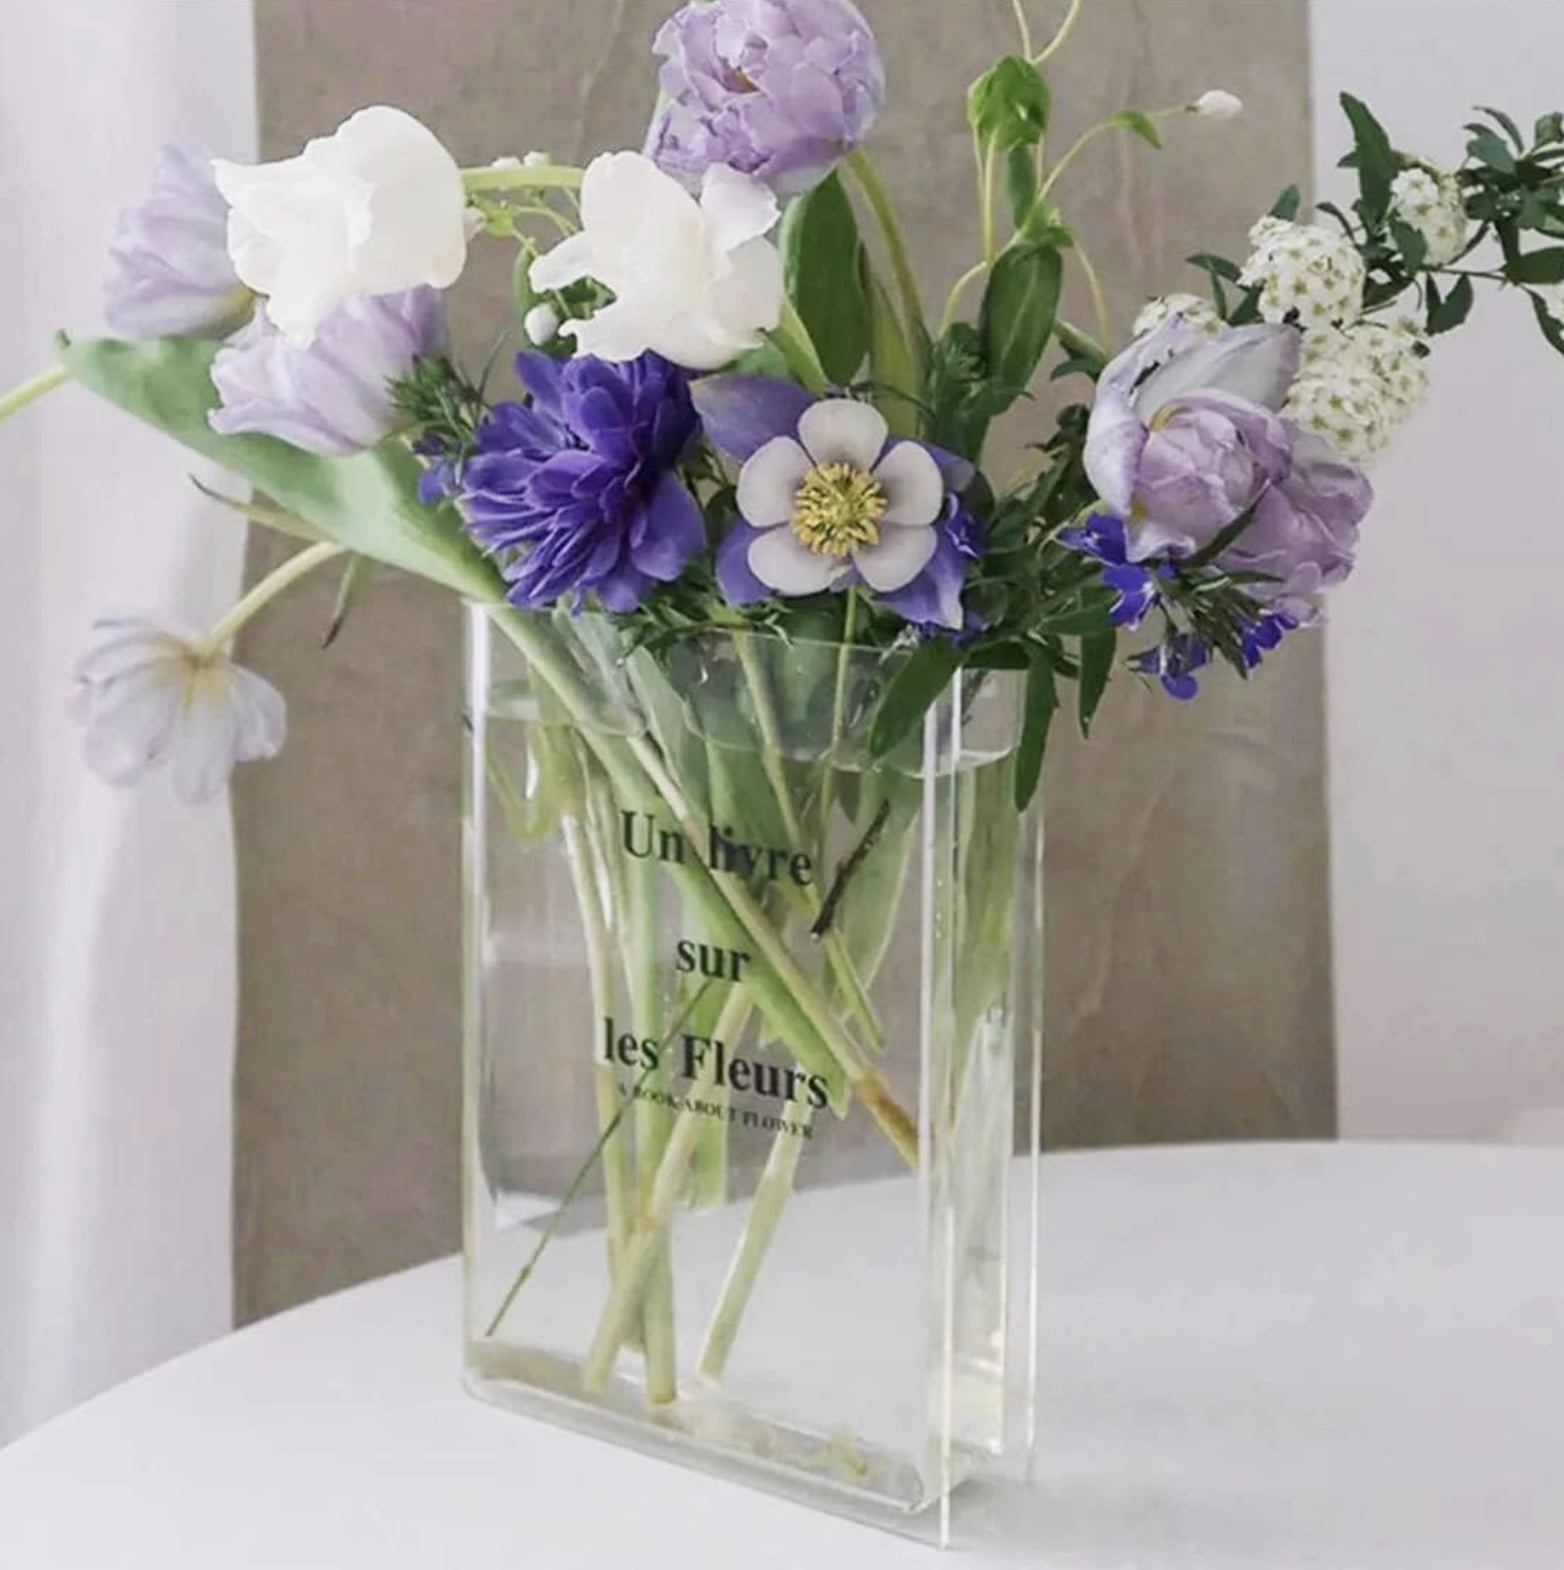 How To Turn Clear Glass Vases Into Any Color You Want, According to TikTok